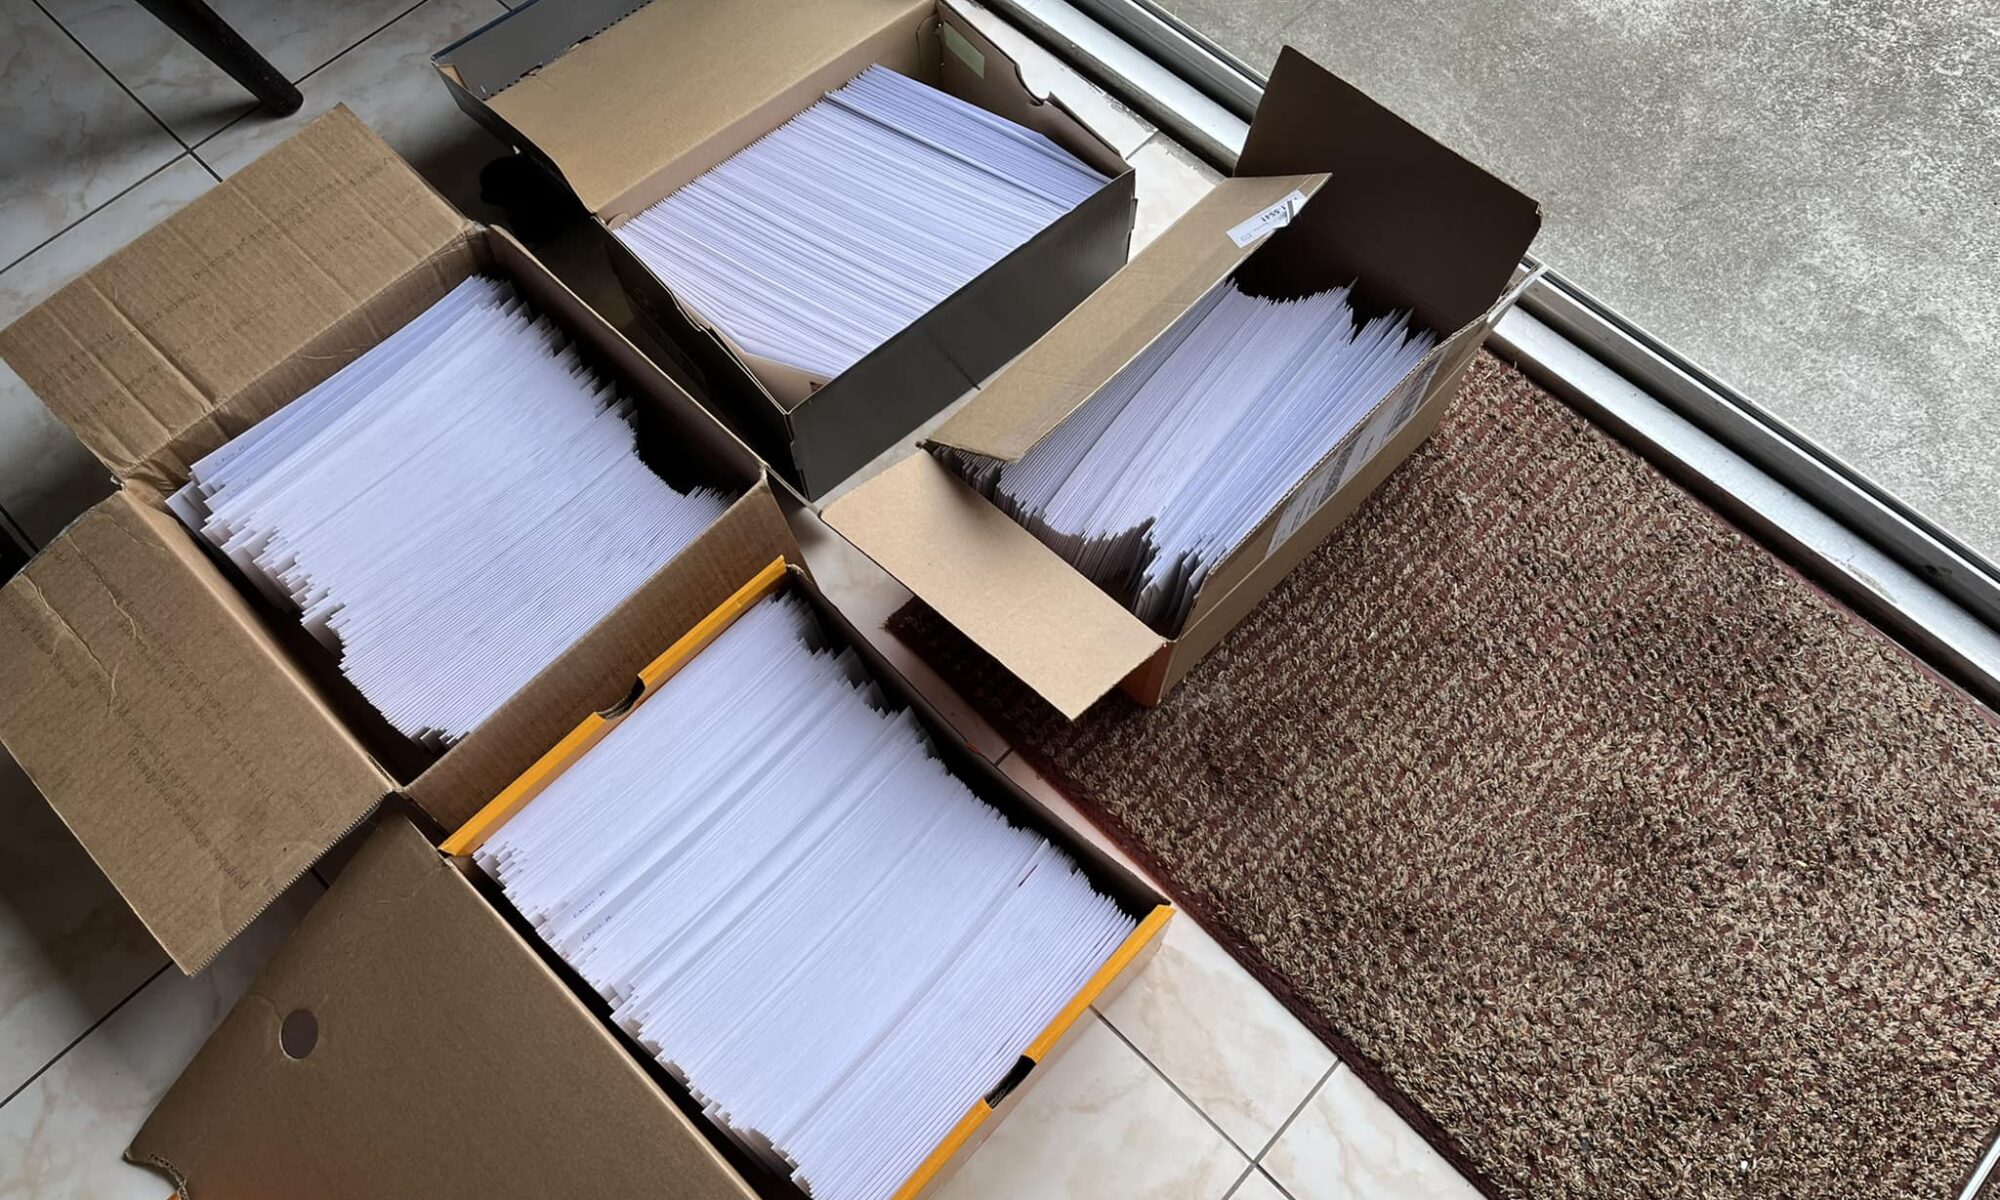 580 letters to voters.